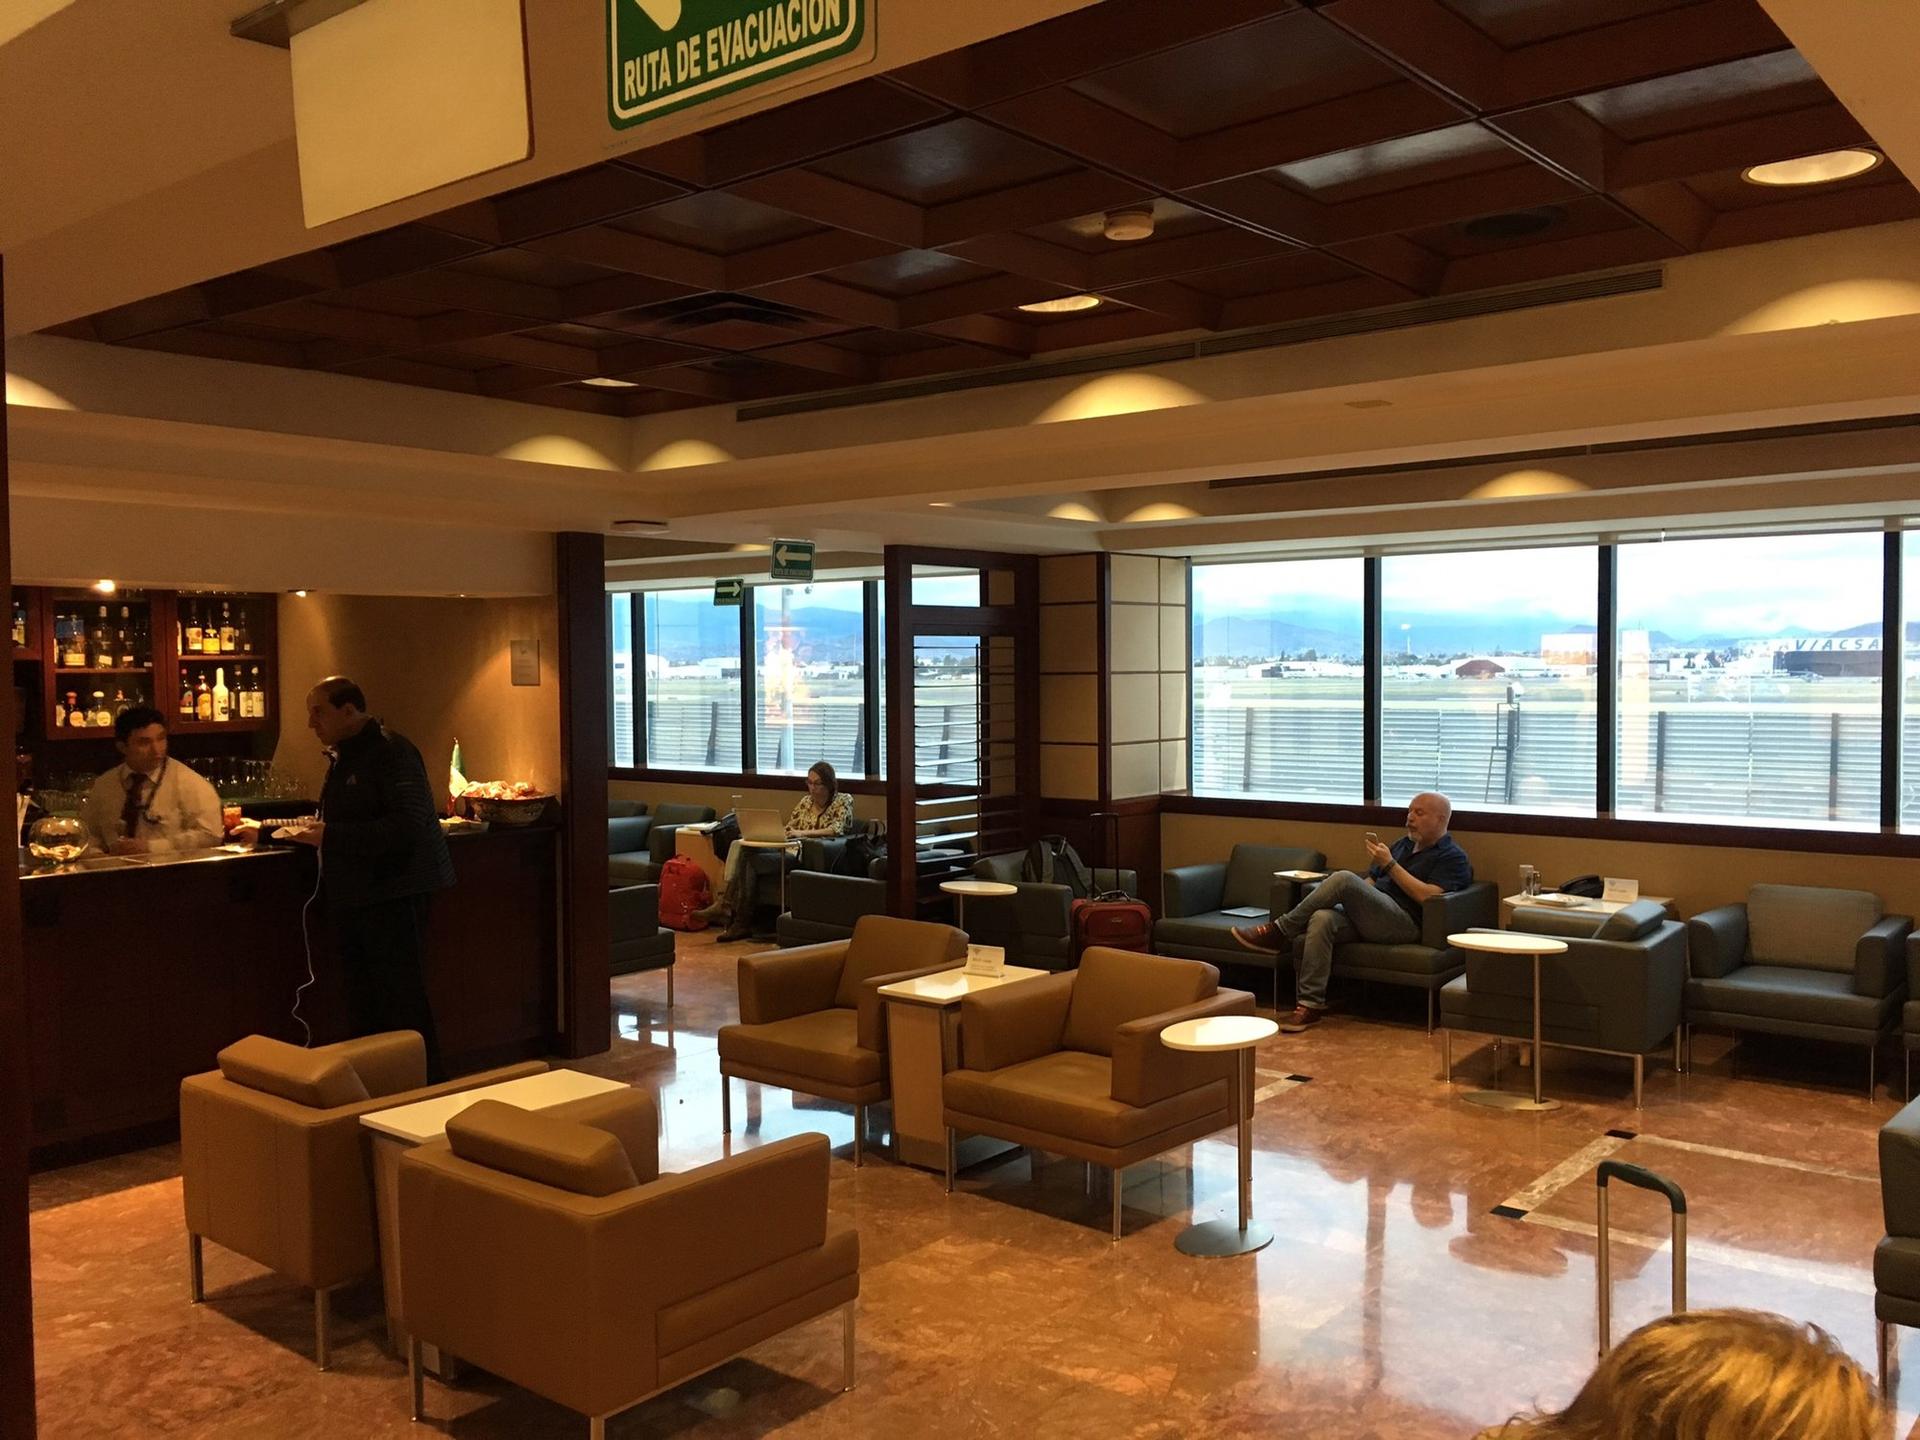 American Airlines Admirals Club image 15 of 32